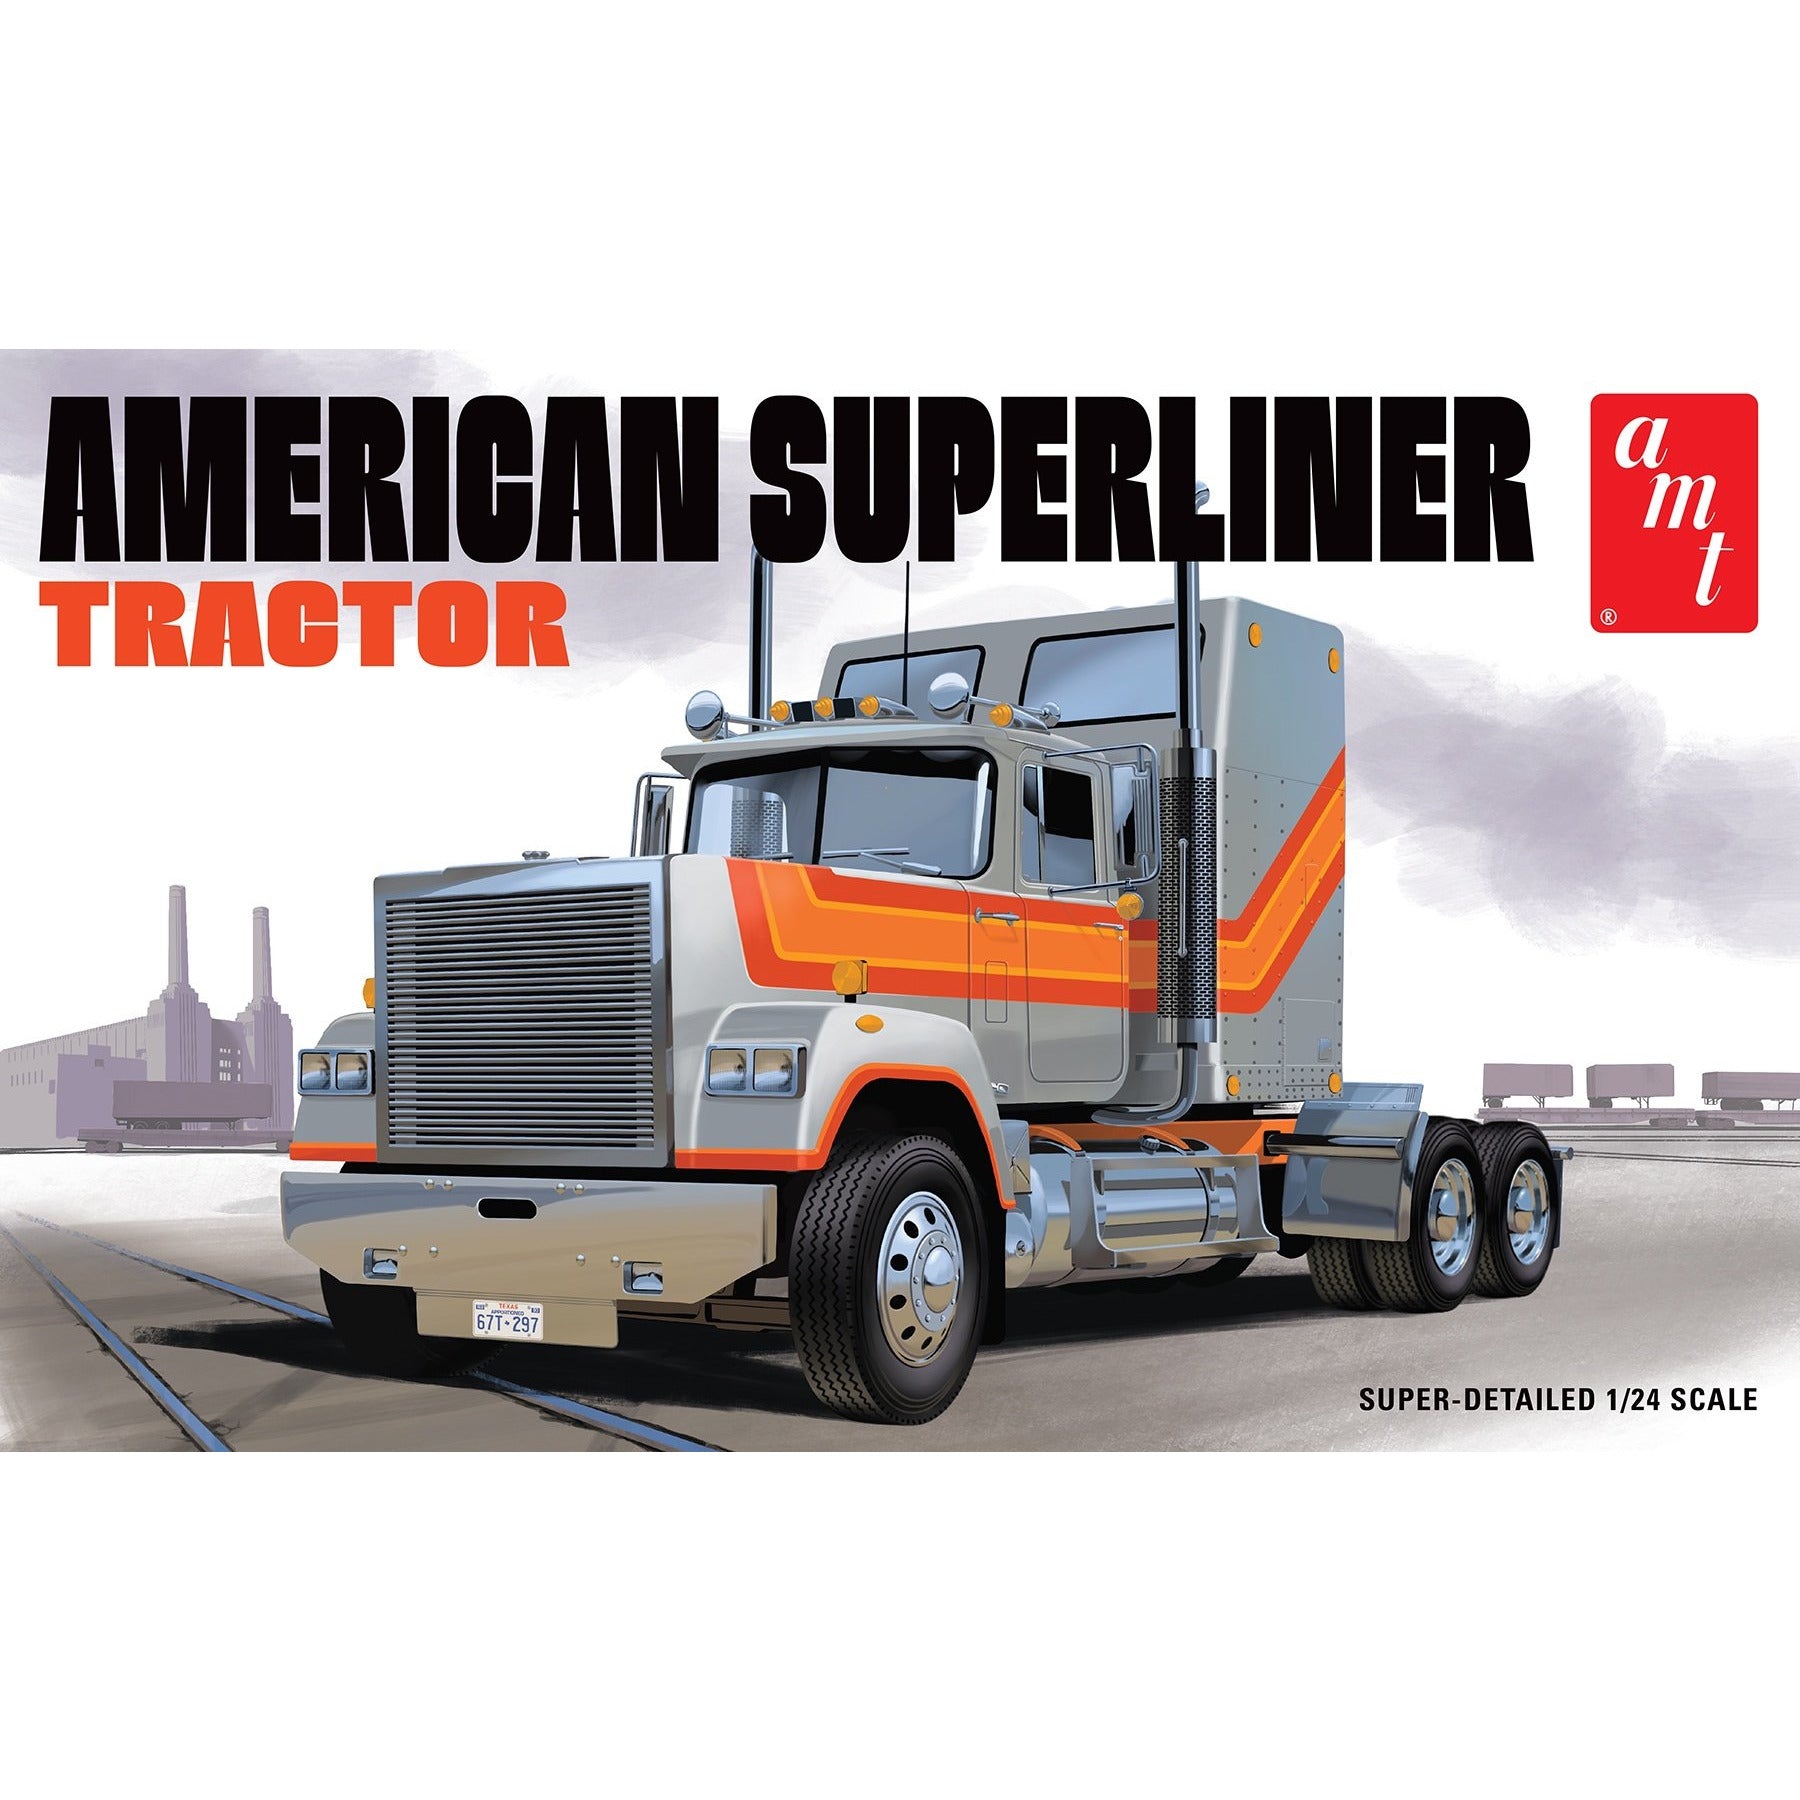 American Superliner Tractor 1/24 #AMT1235/08 by AMT